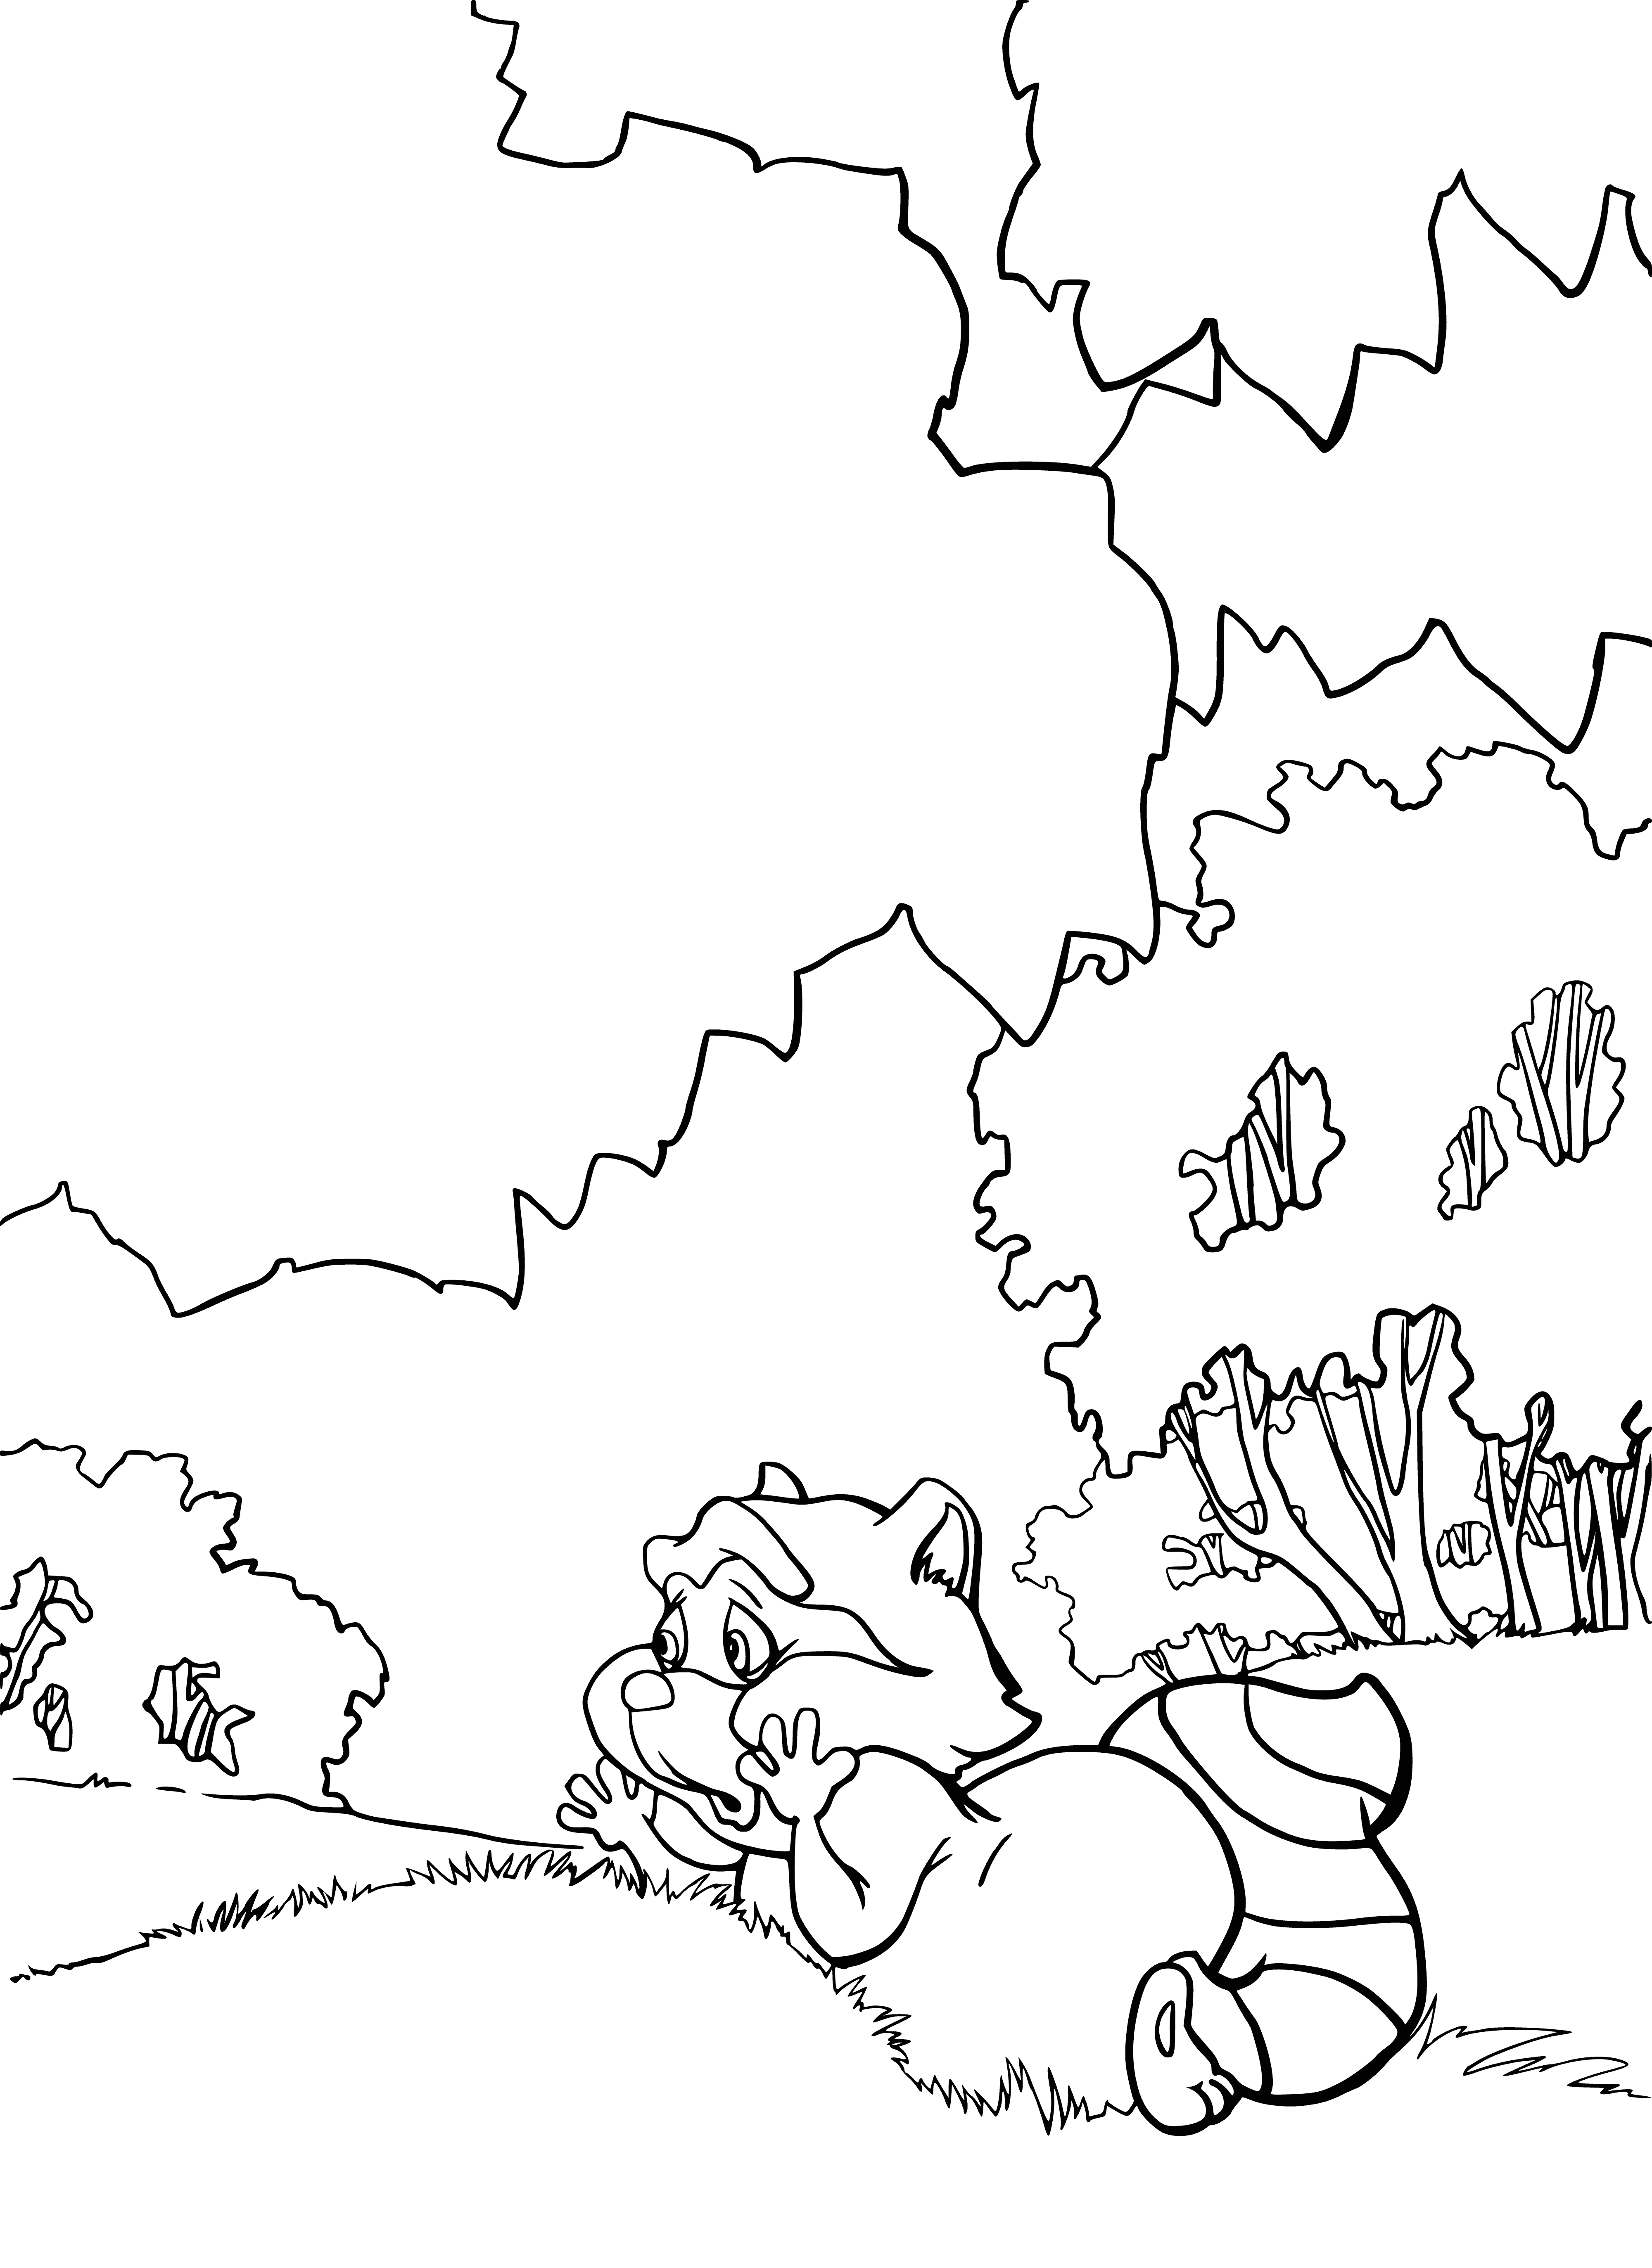 coloring page: Oreshenka laughs as the bunny, Buttercup, hops around her wearing a blue bowtie. She has long, dark hair, a light blue dress and a white scarf.